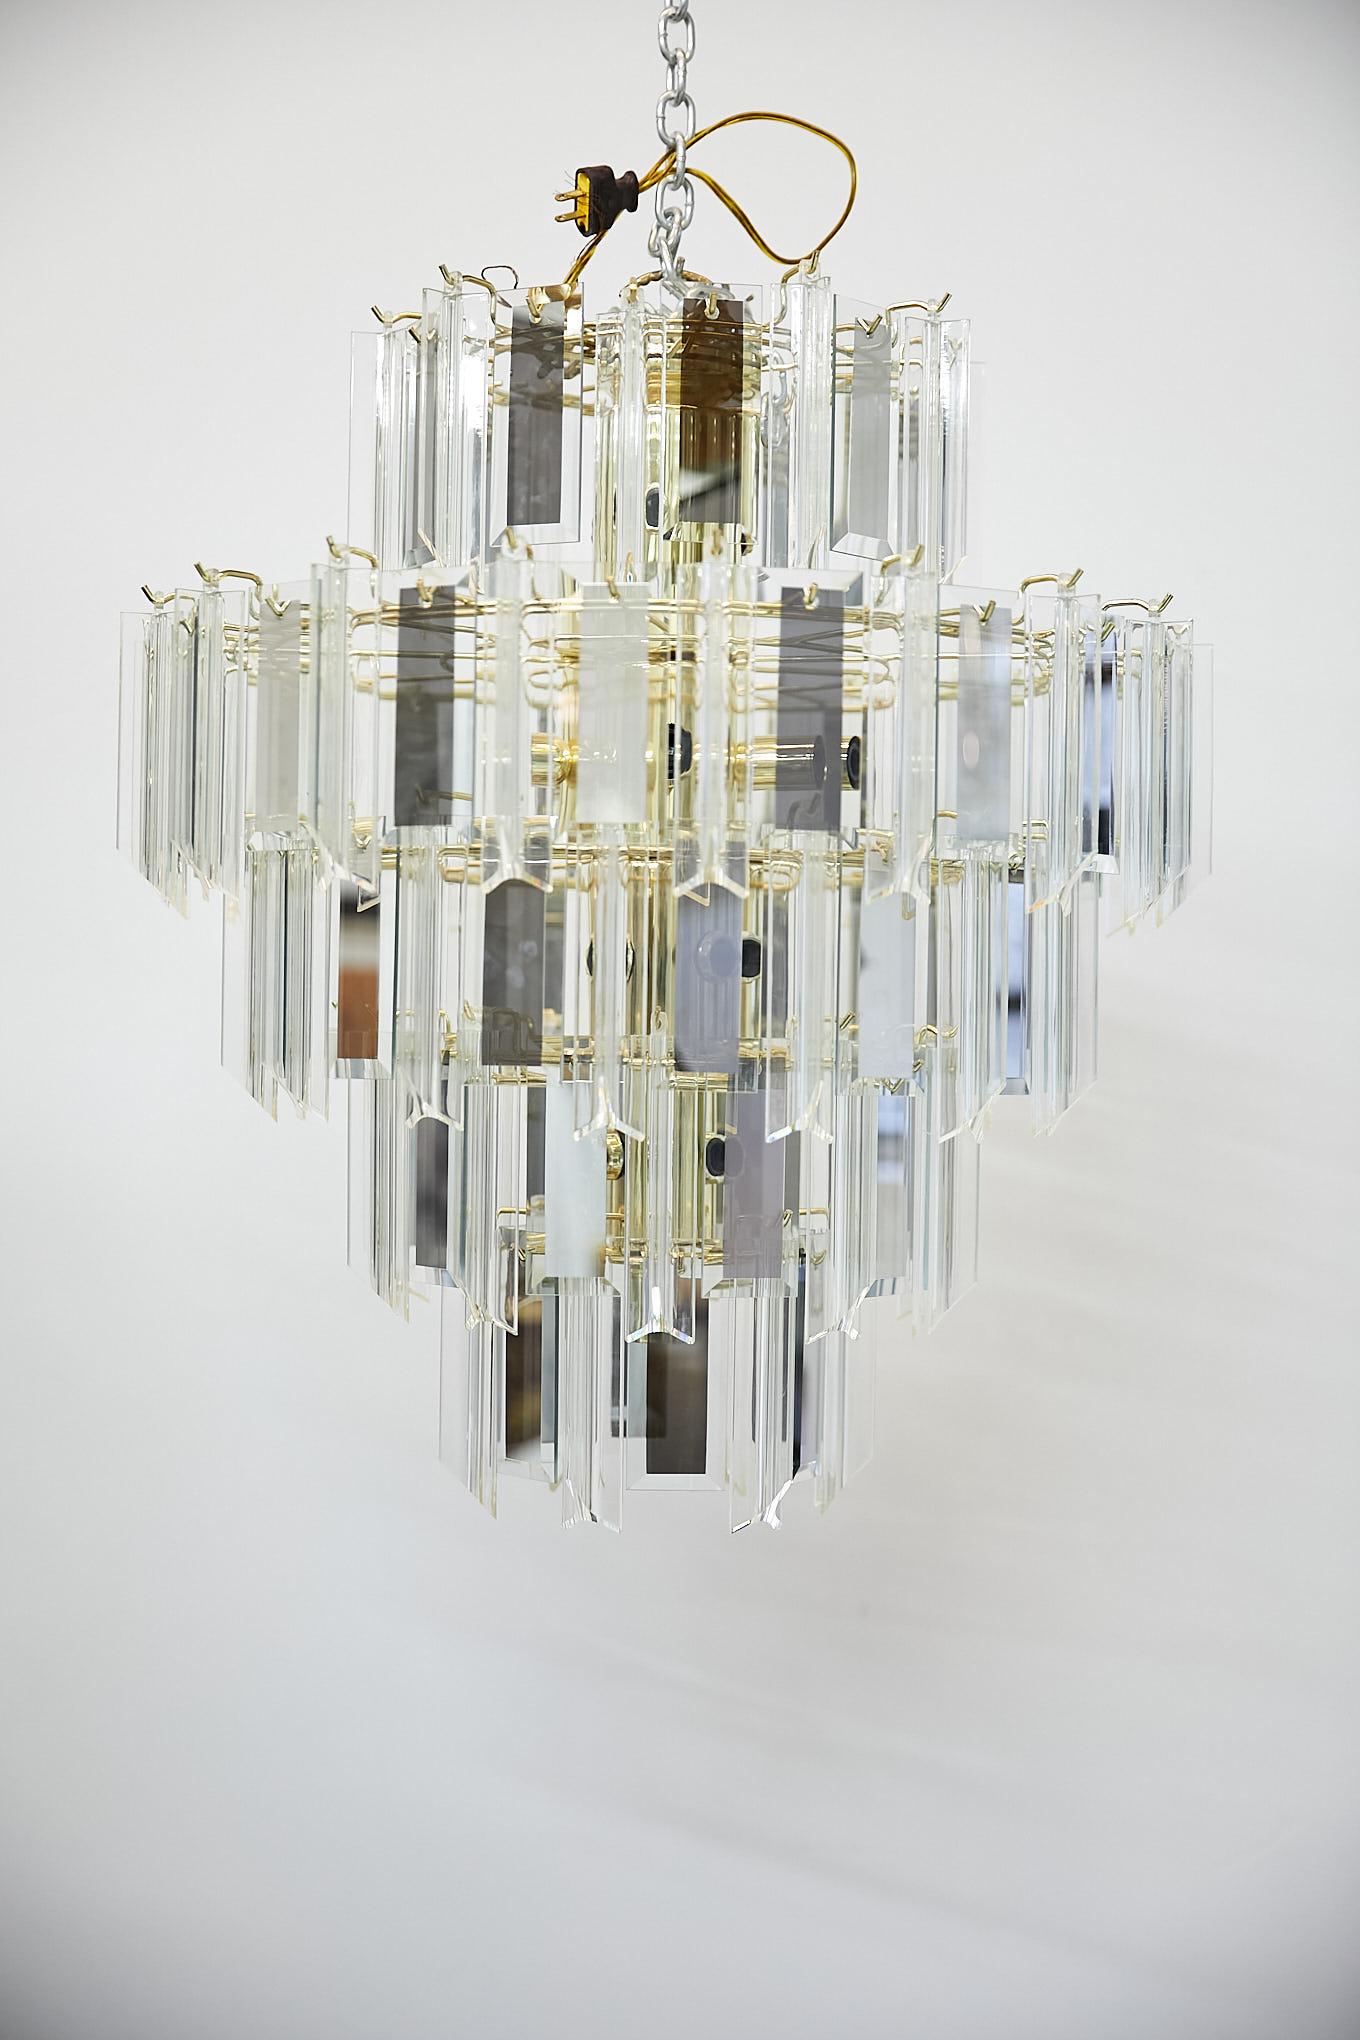 Vintage Italian five-tier waterfall or wedding cake style chandelier having a cylindrical brass frame and fittings.
The chandelier has alternating clear Lucite prisms and rectangular mirrored and beveled glass panes that cascade and taper downward.